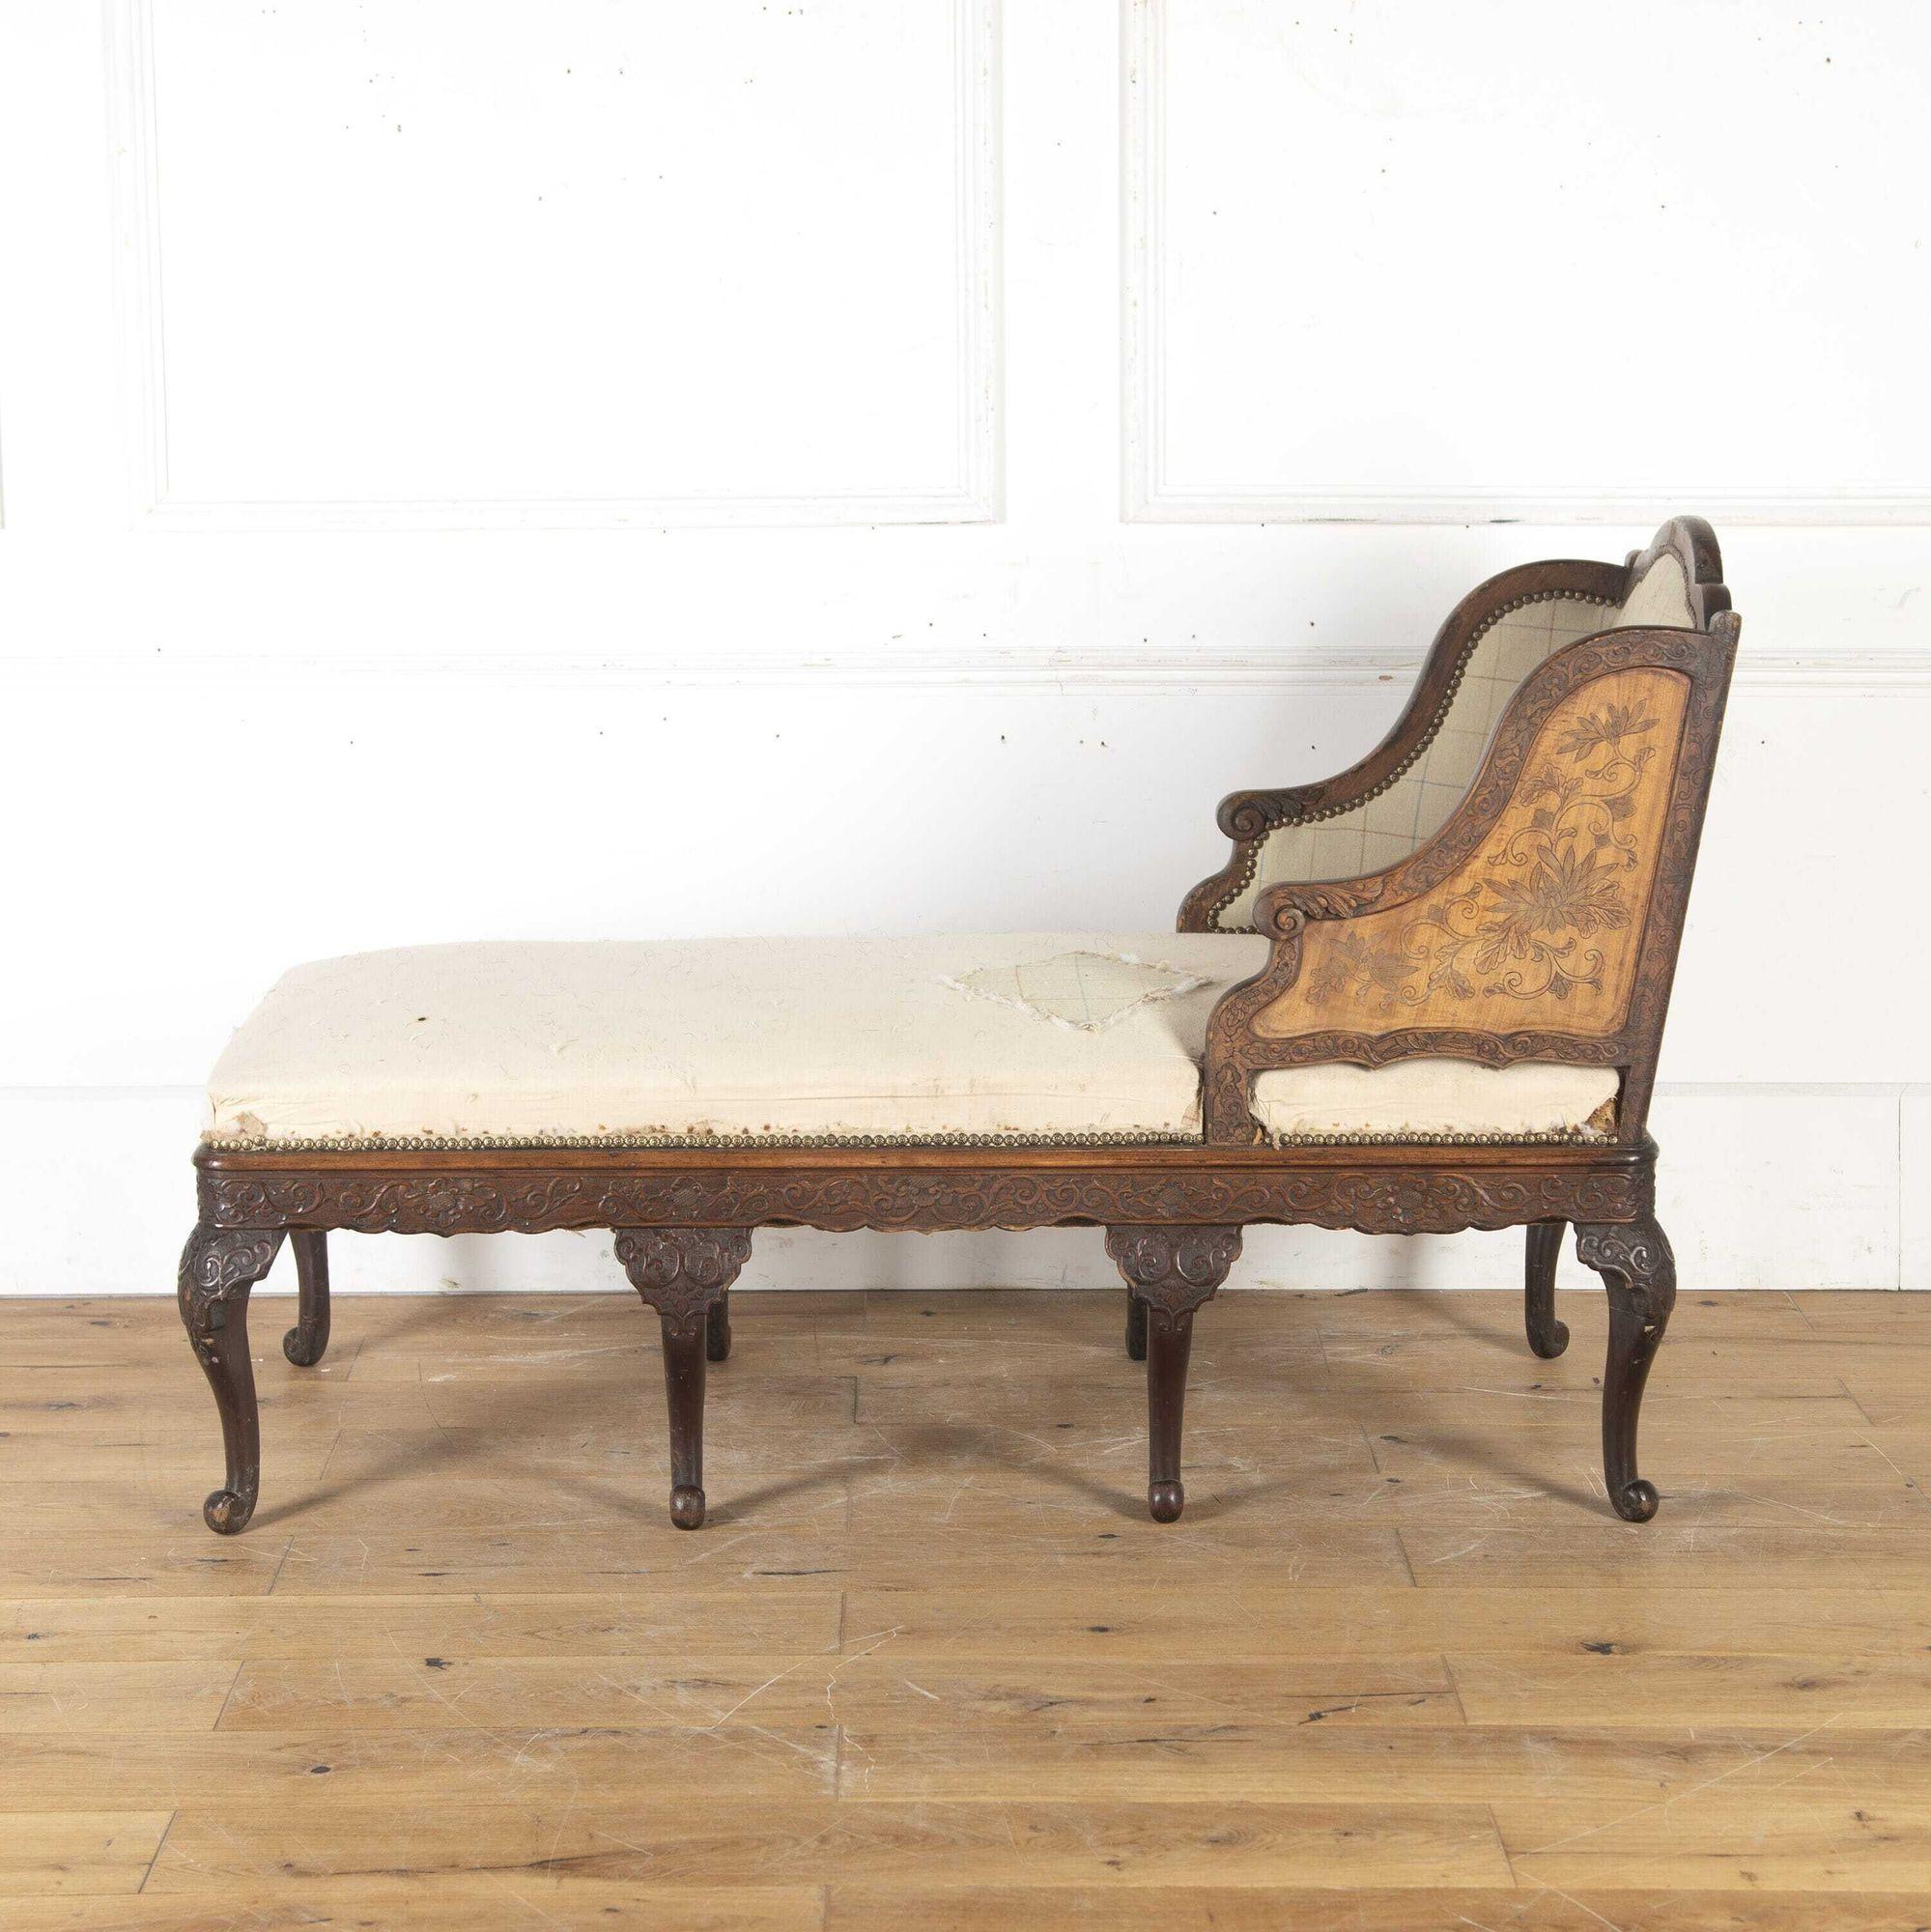 Fantastic and unusual Chinese trade chaise longue in the Louis XV style, circa 1850. 
This daybed was likely made in Canton for export to the French market. It combines numerous styles in a very rare manner. 
The whole is raised on eight cabriole